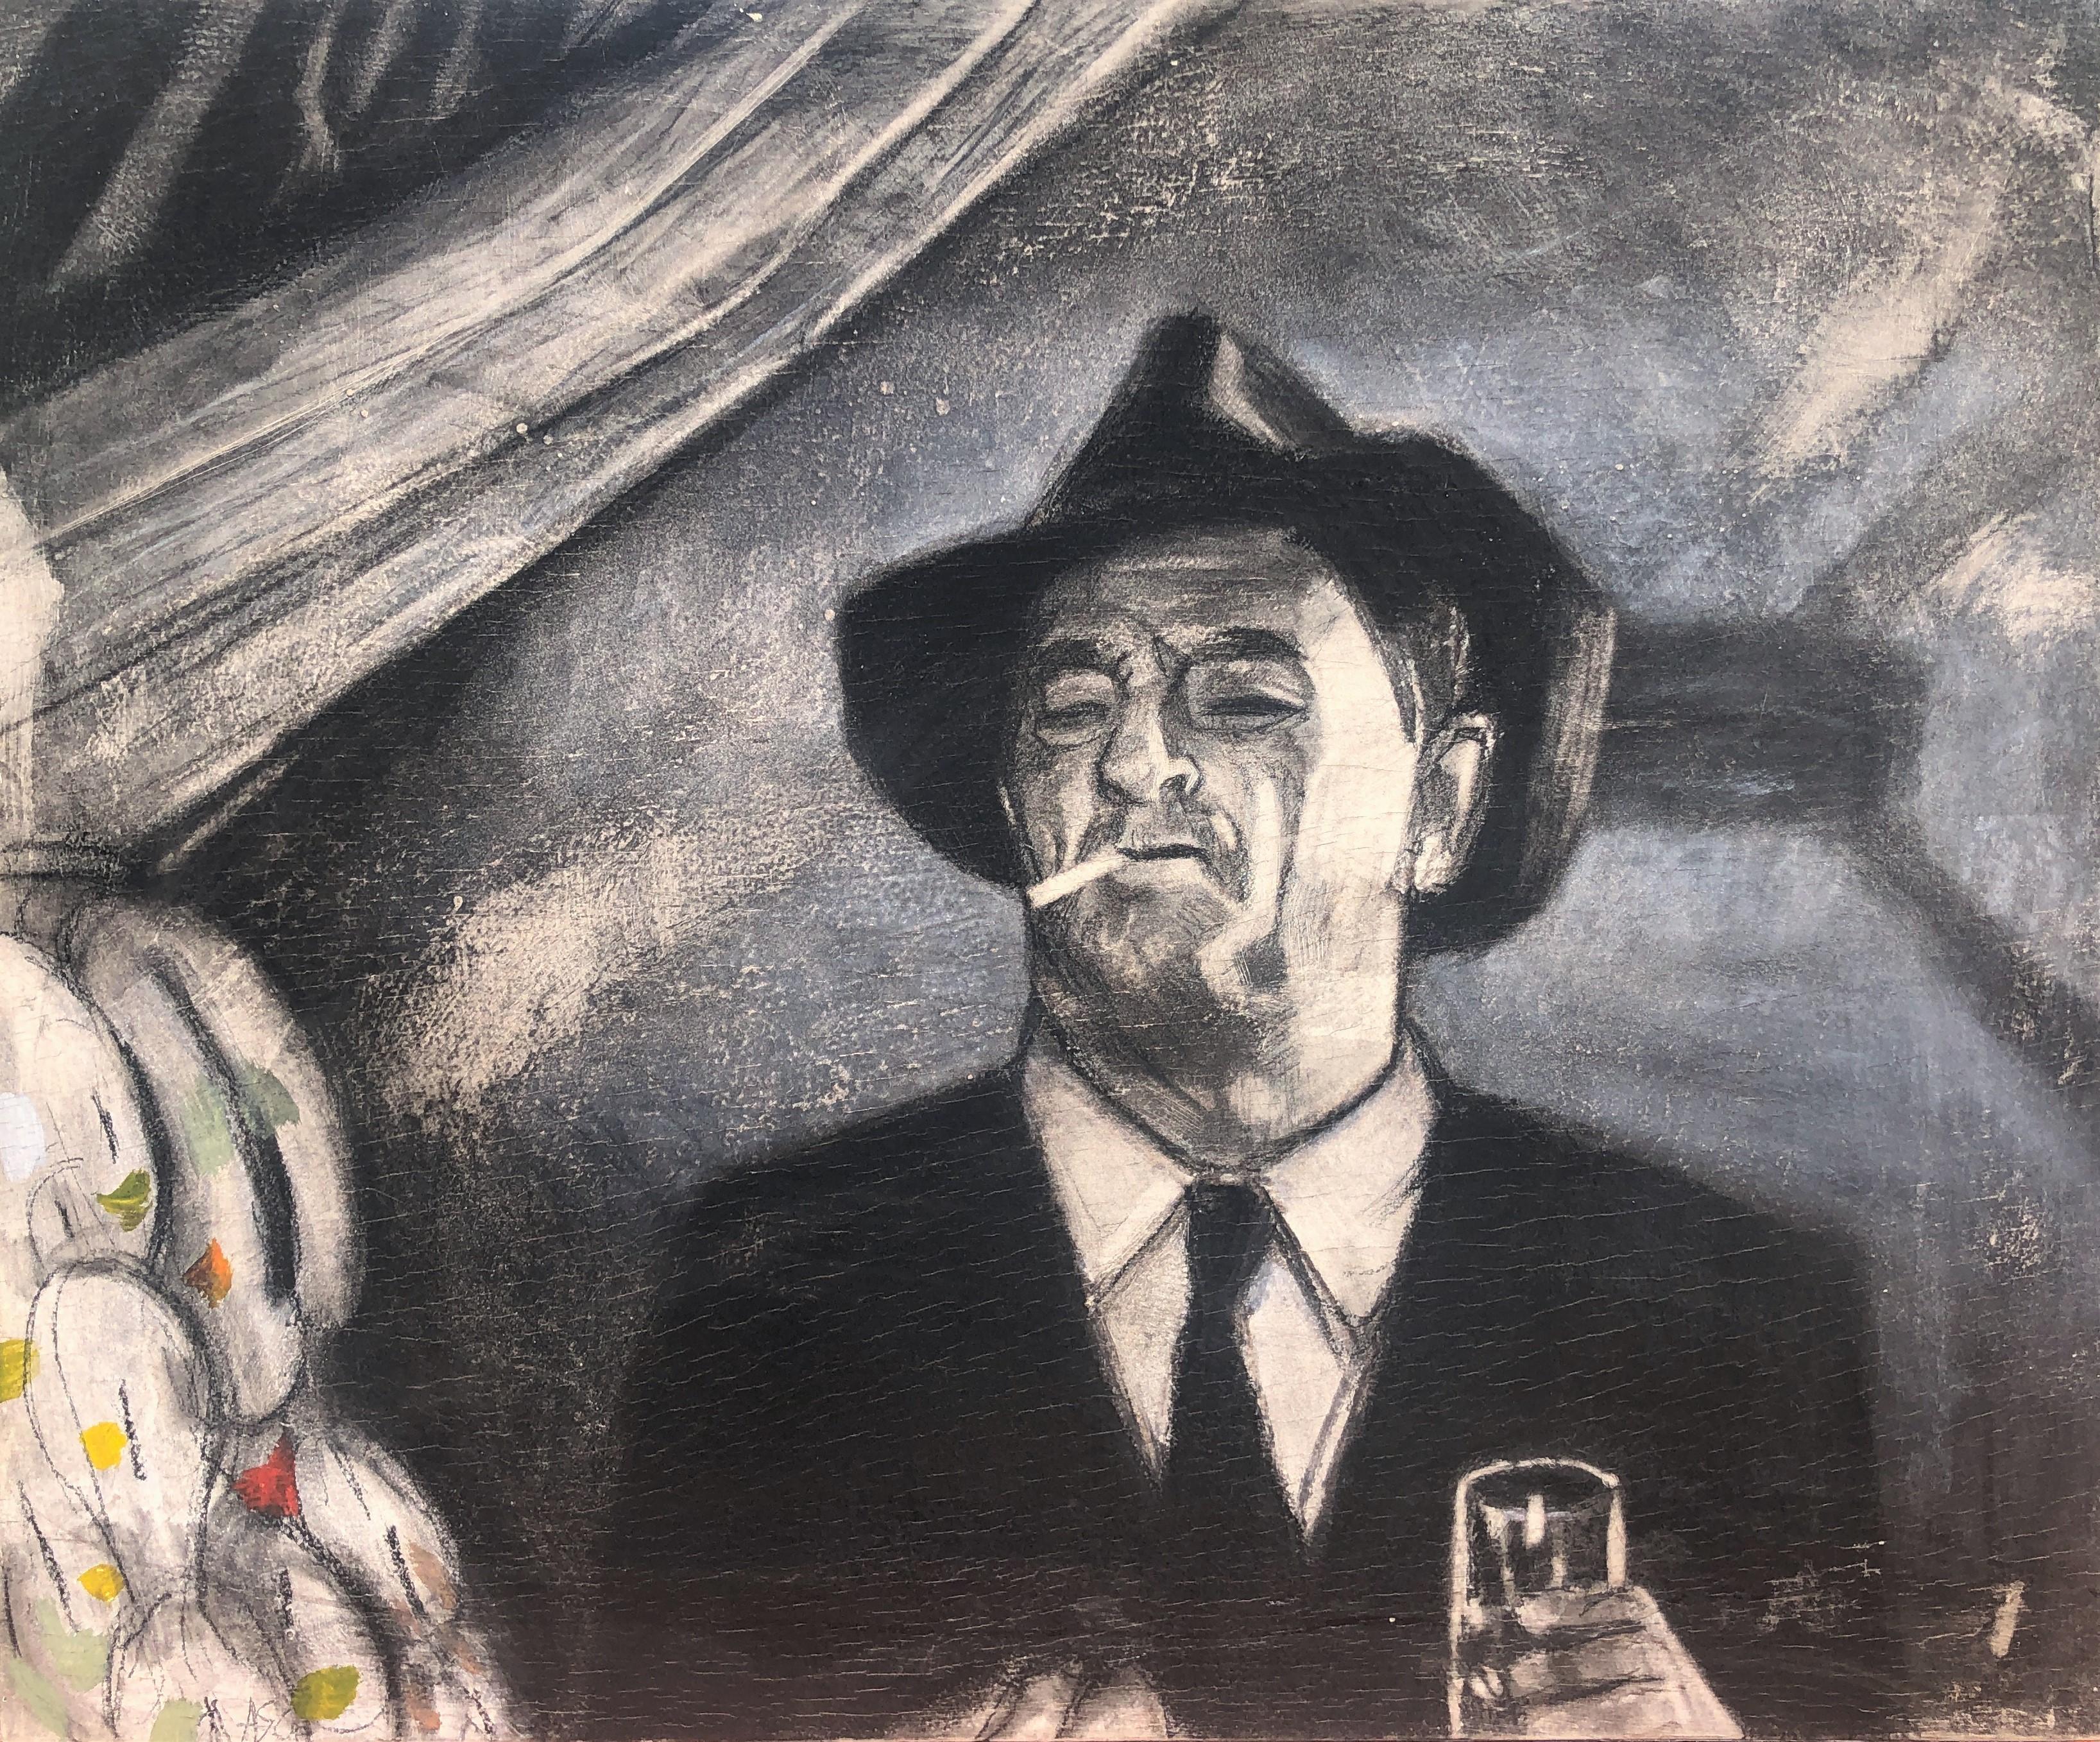 Robert Mitchum Farewell, My Lovely 1975 mixed media on board painting